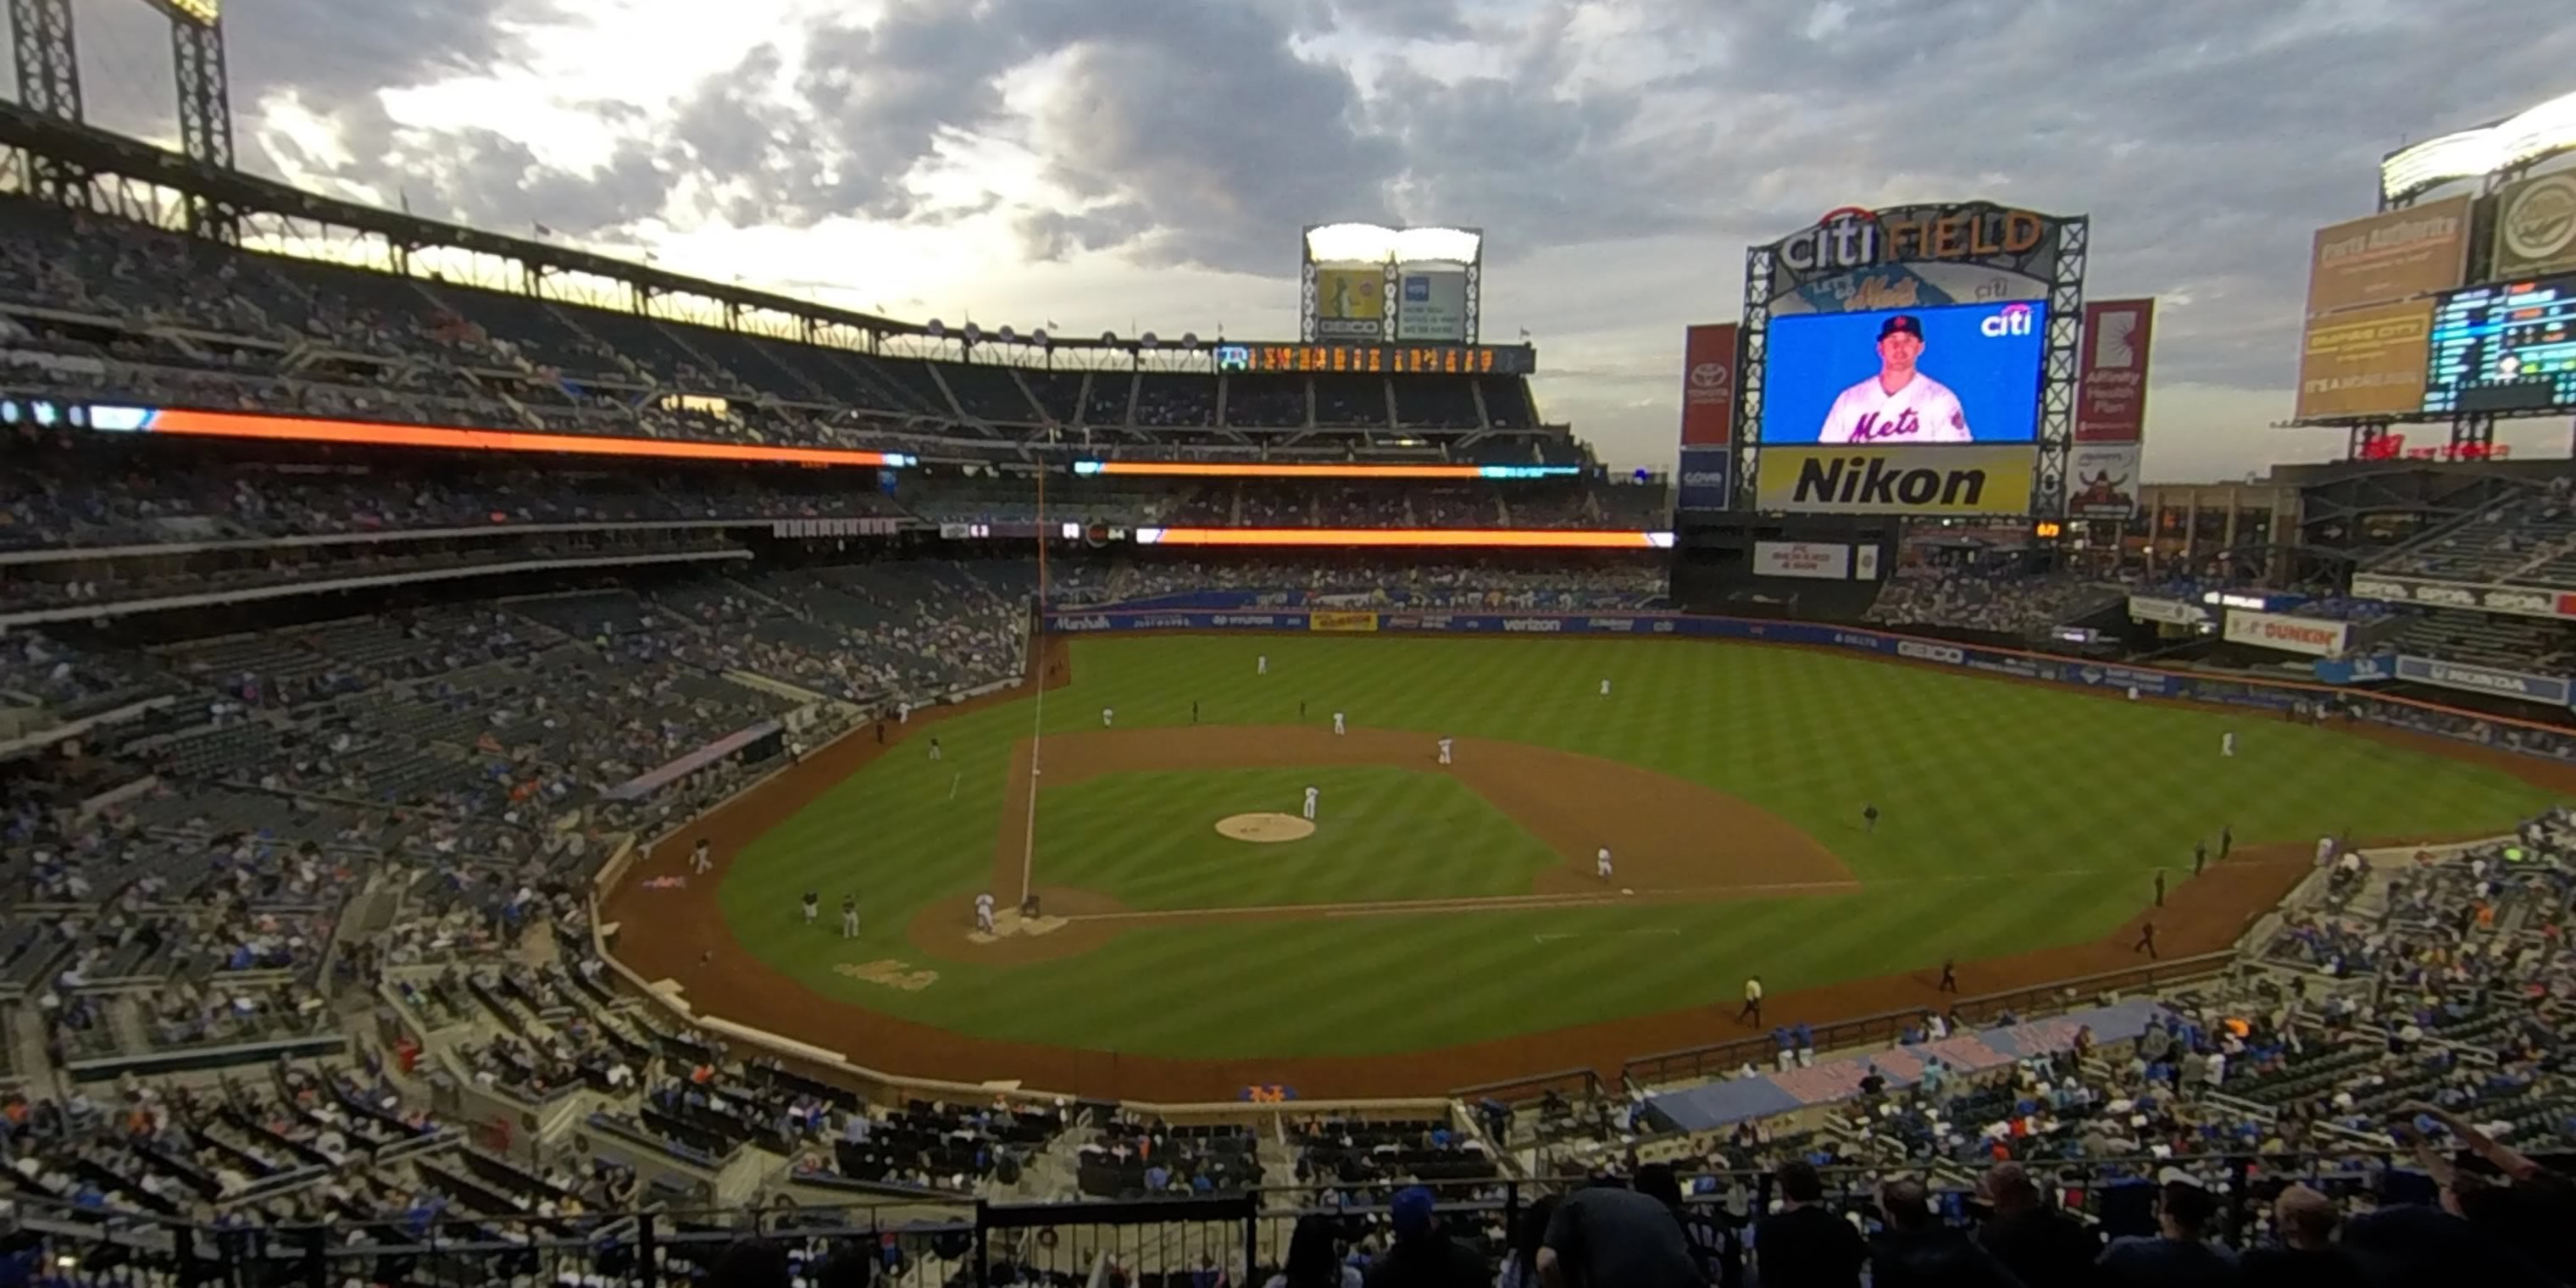 section 314 panoramic seat view  - citi field